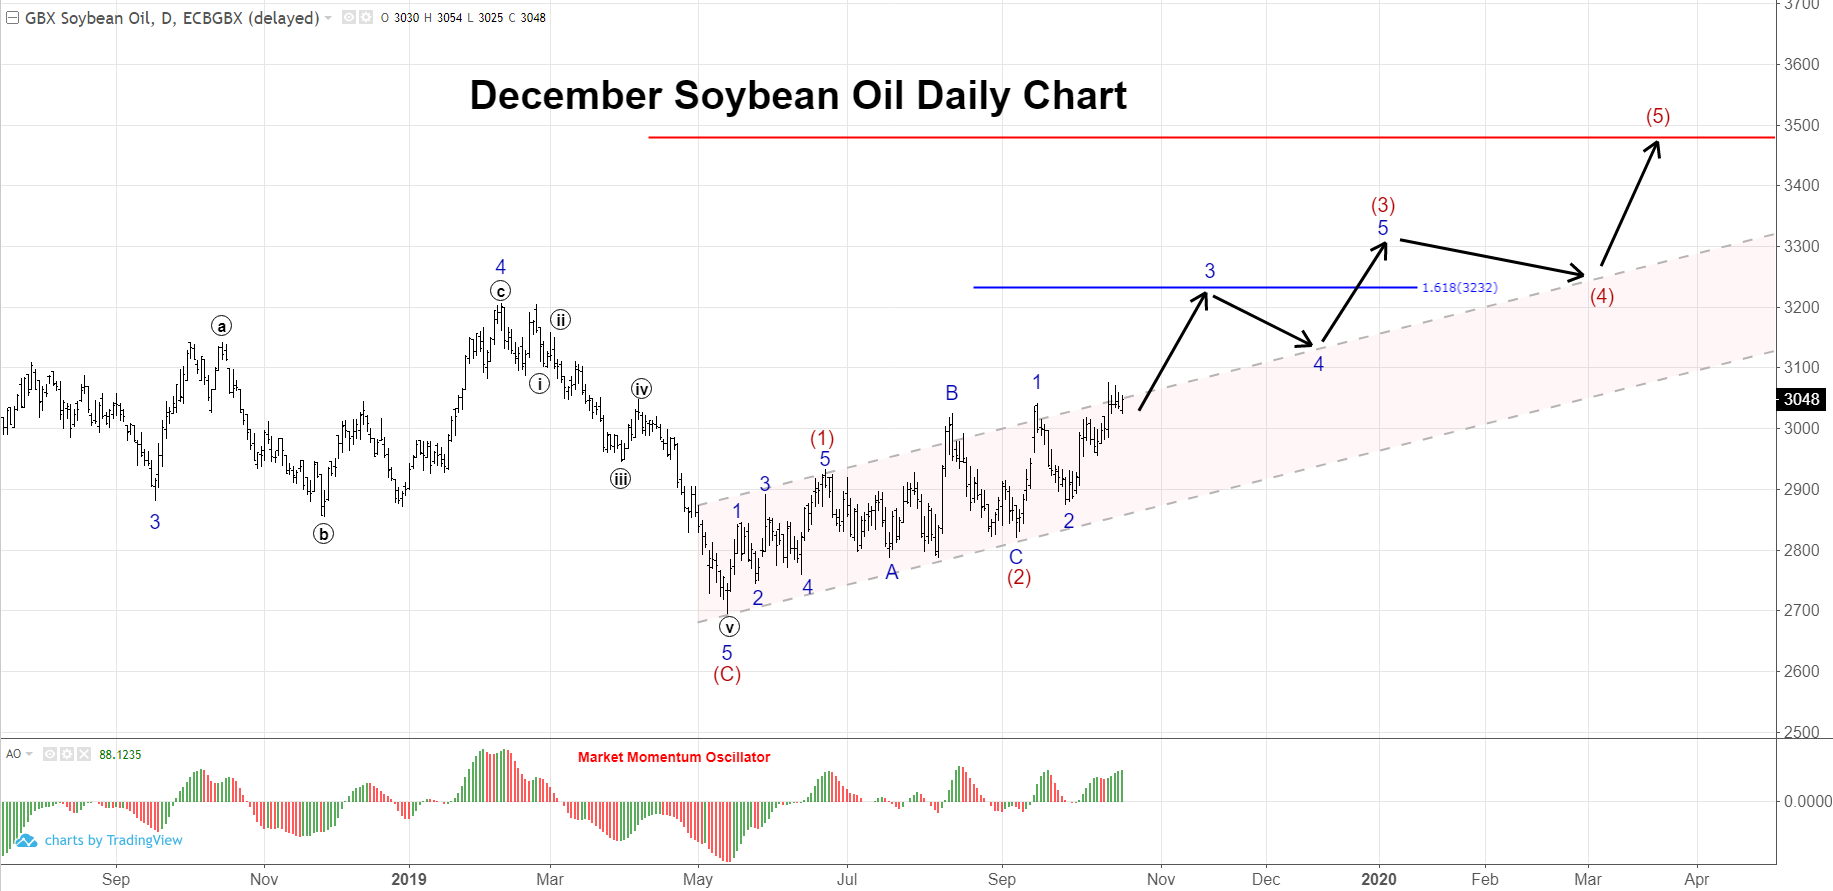 December Soybean Oil Futures Daily Chart